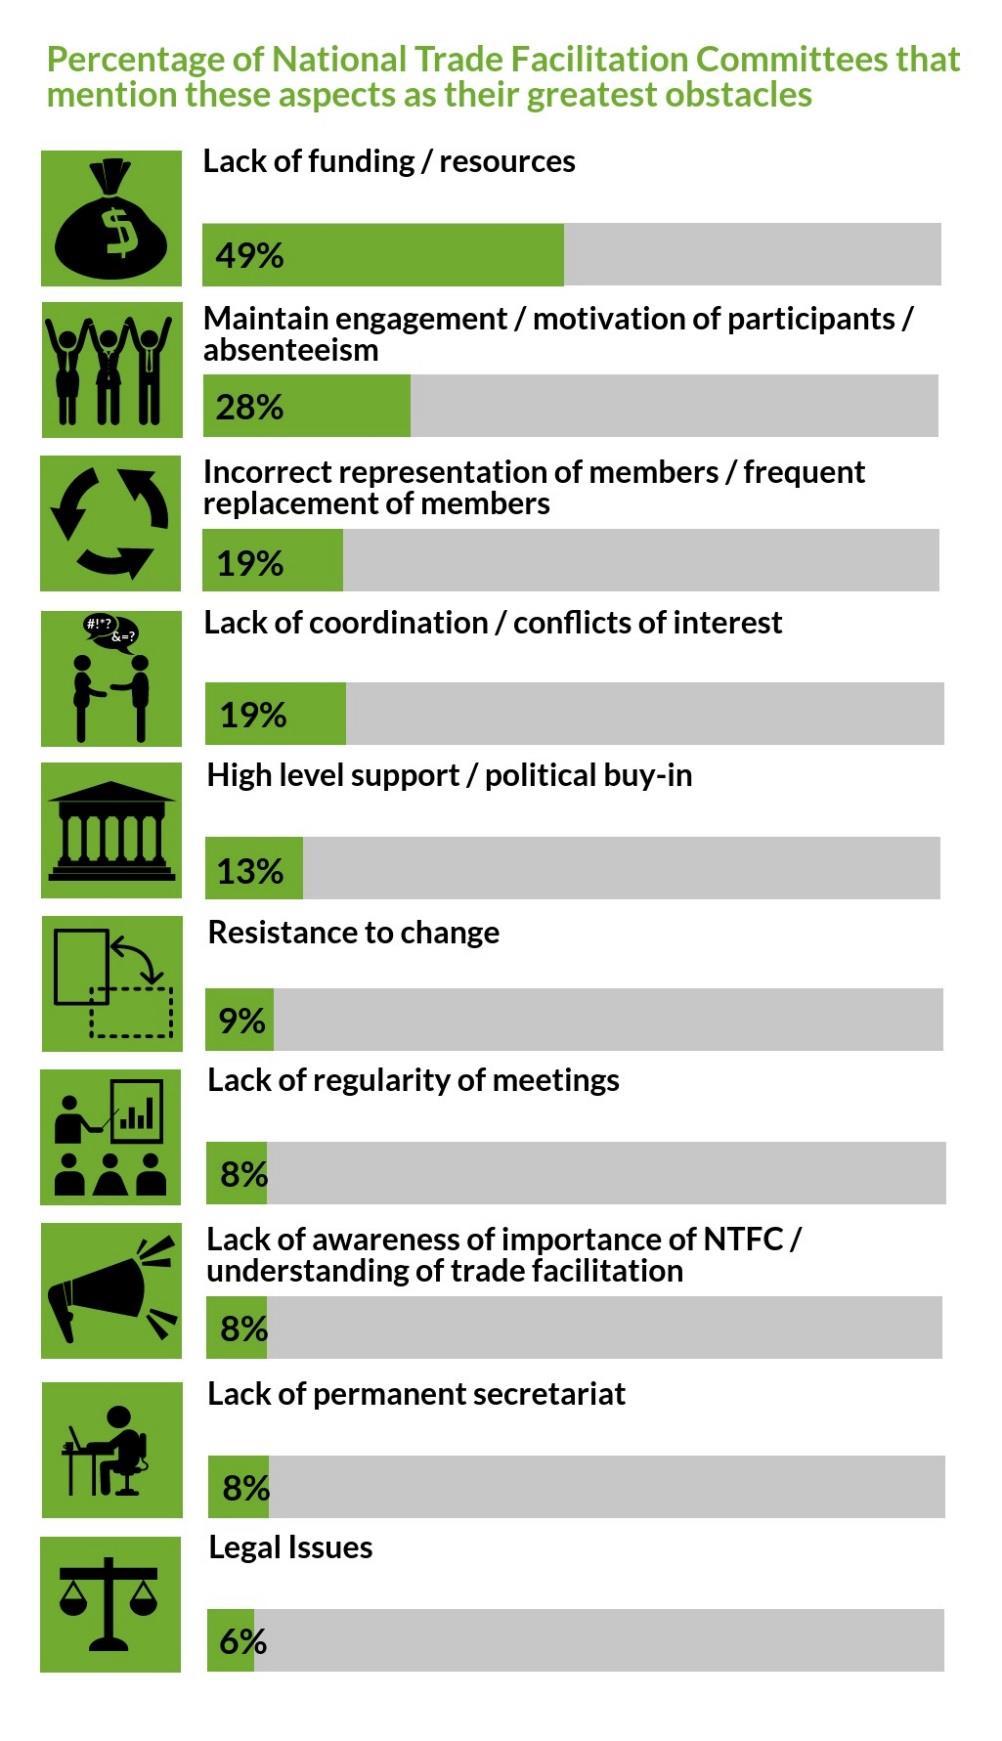 Figure 37: Main obstacles for National Trade Facilitation Committees Source: UNCTAD, based on data from the